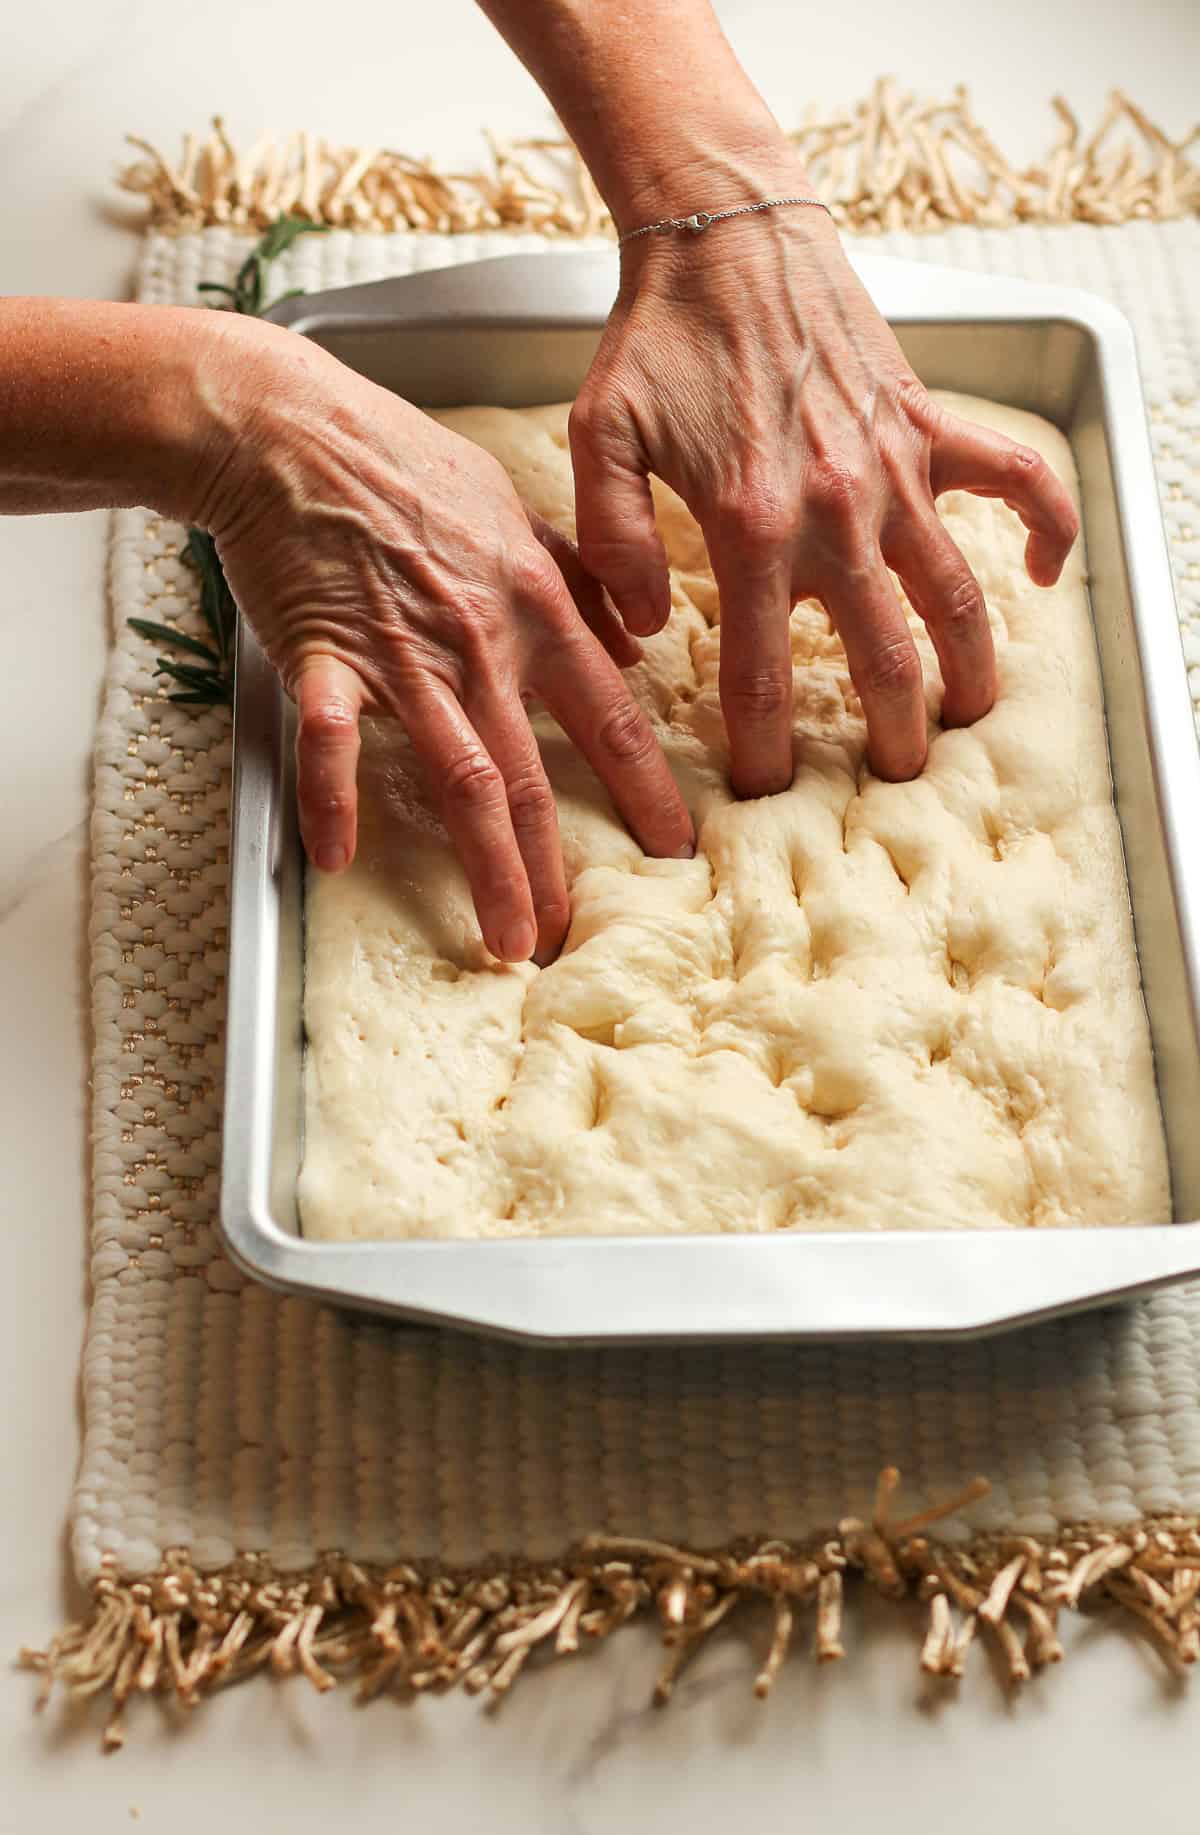 My hands poking holes in the bread dough.